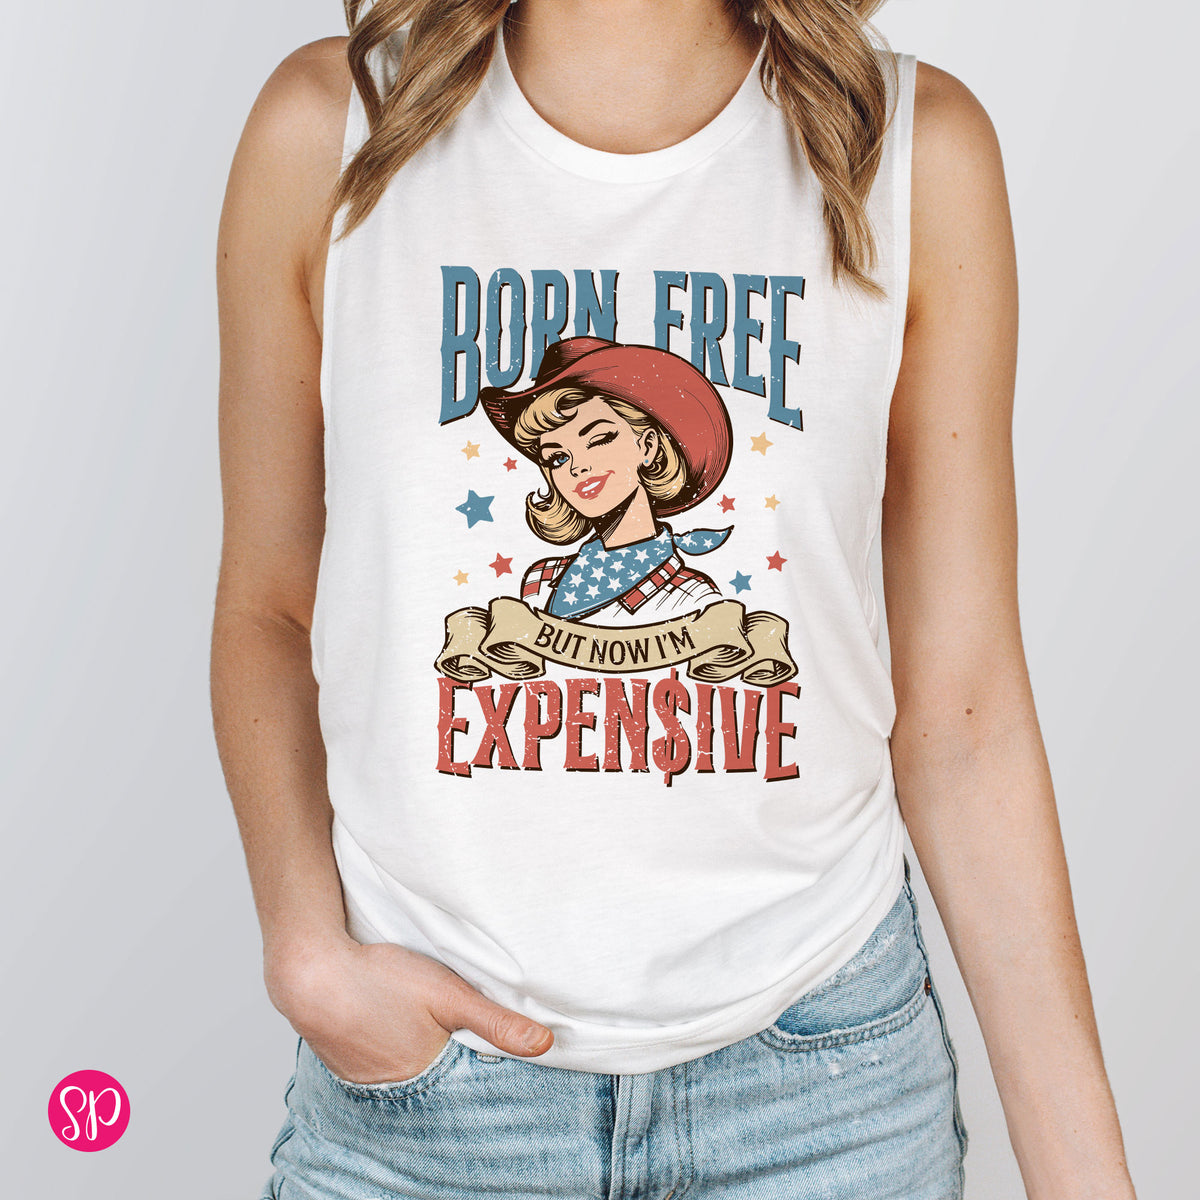 Born Free But Now I'm Expensive Muscle Tee